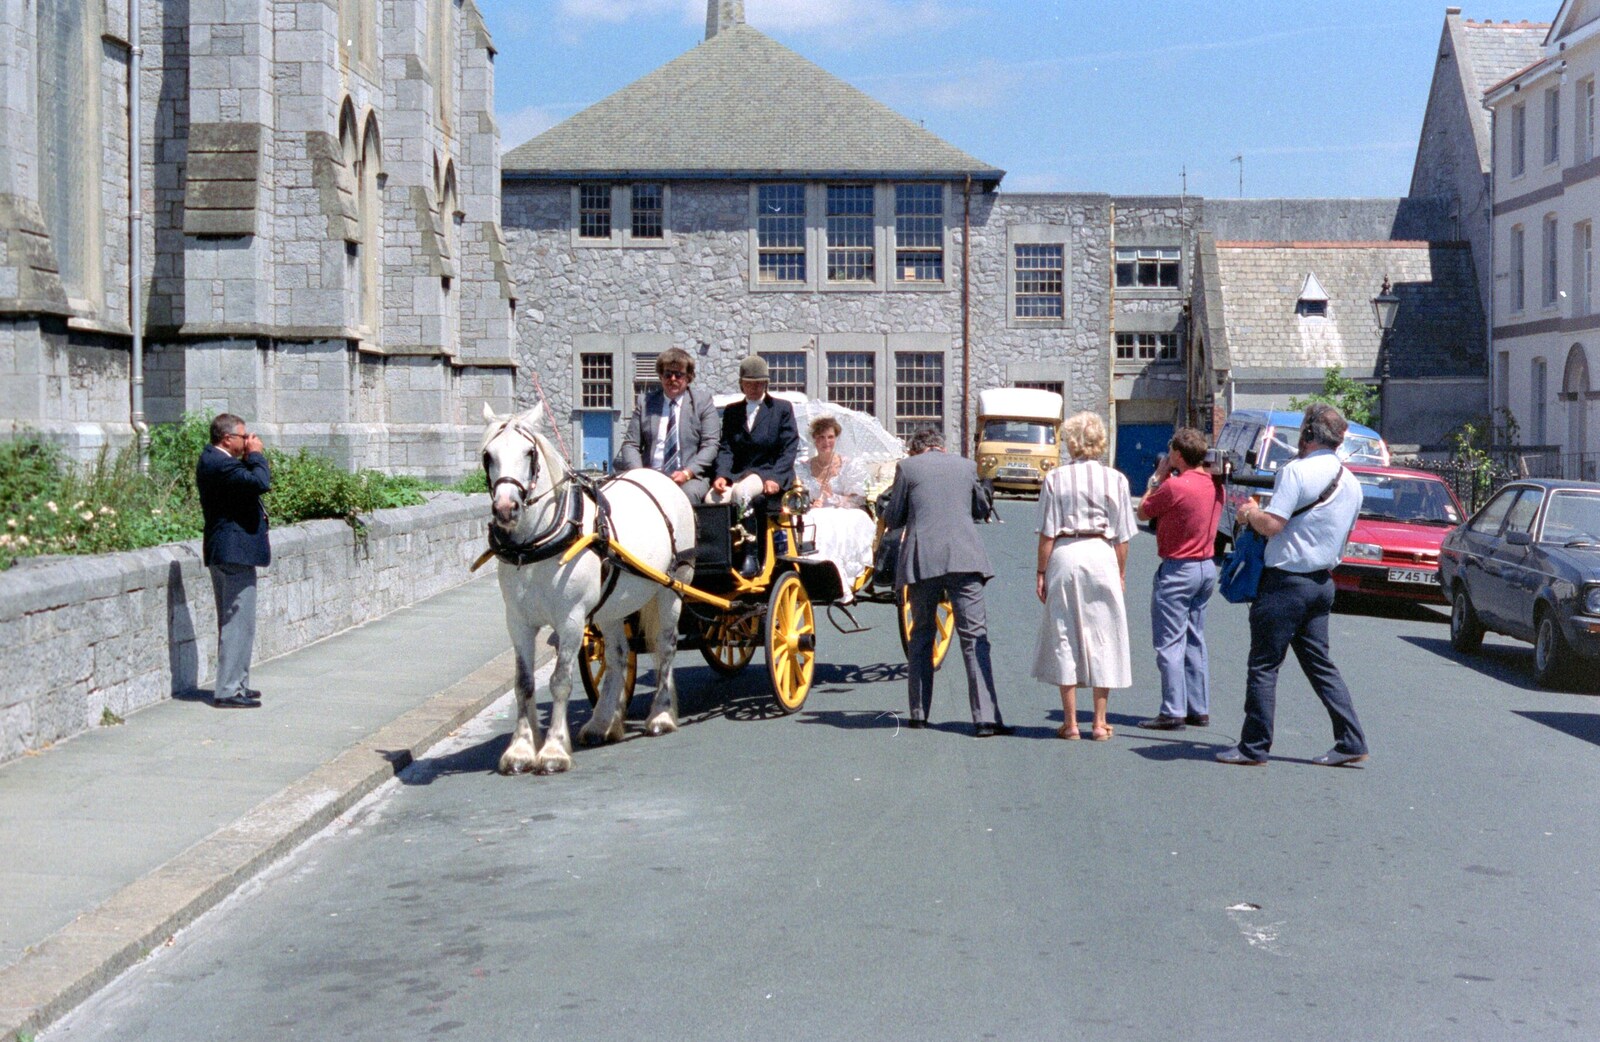 The bride arrives from Uni: Risky Business, A Wedding Occurs and Dave Leaves, Wyndham Square, Plymouth - 15th July 1989